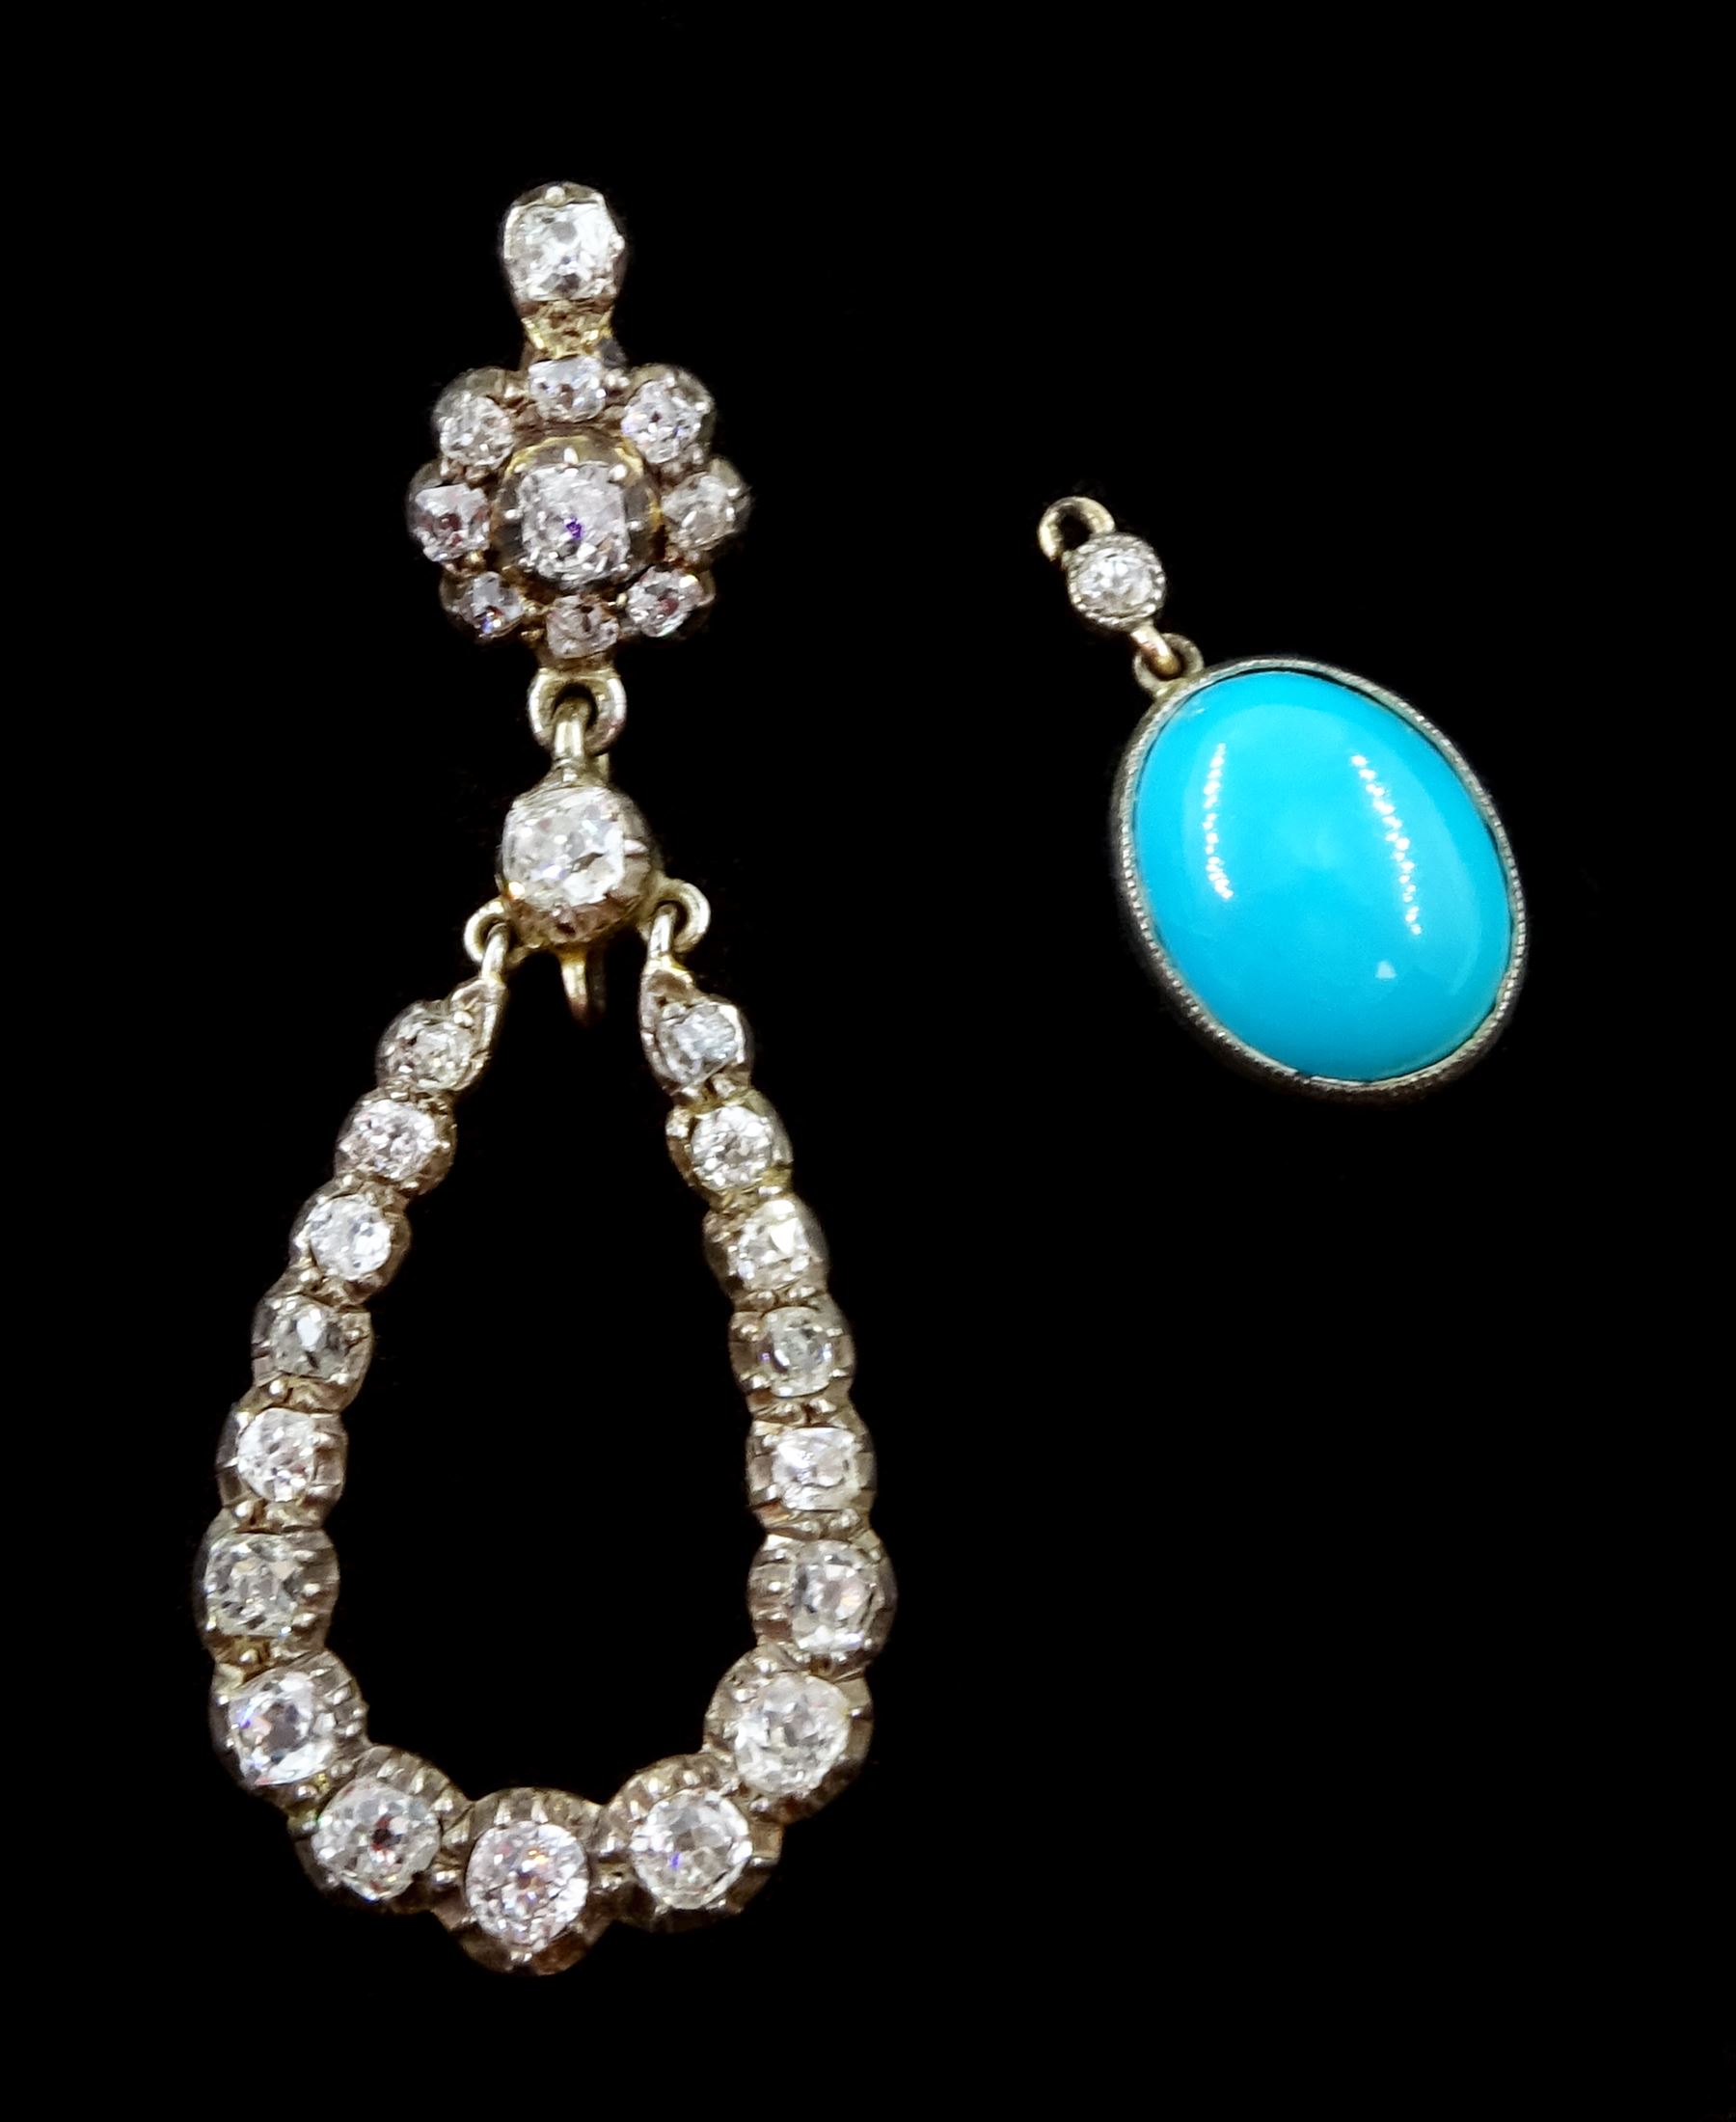 Pair of 19th / early 20th century gold and silver turquoise and old cut diamond pendant earrings - Image 5 of 5